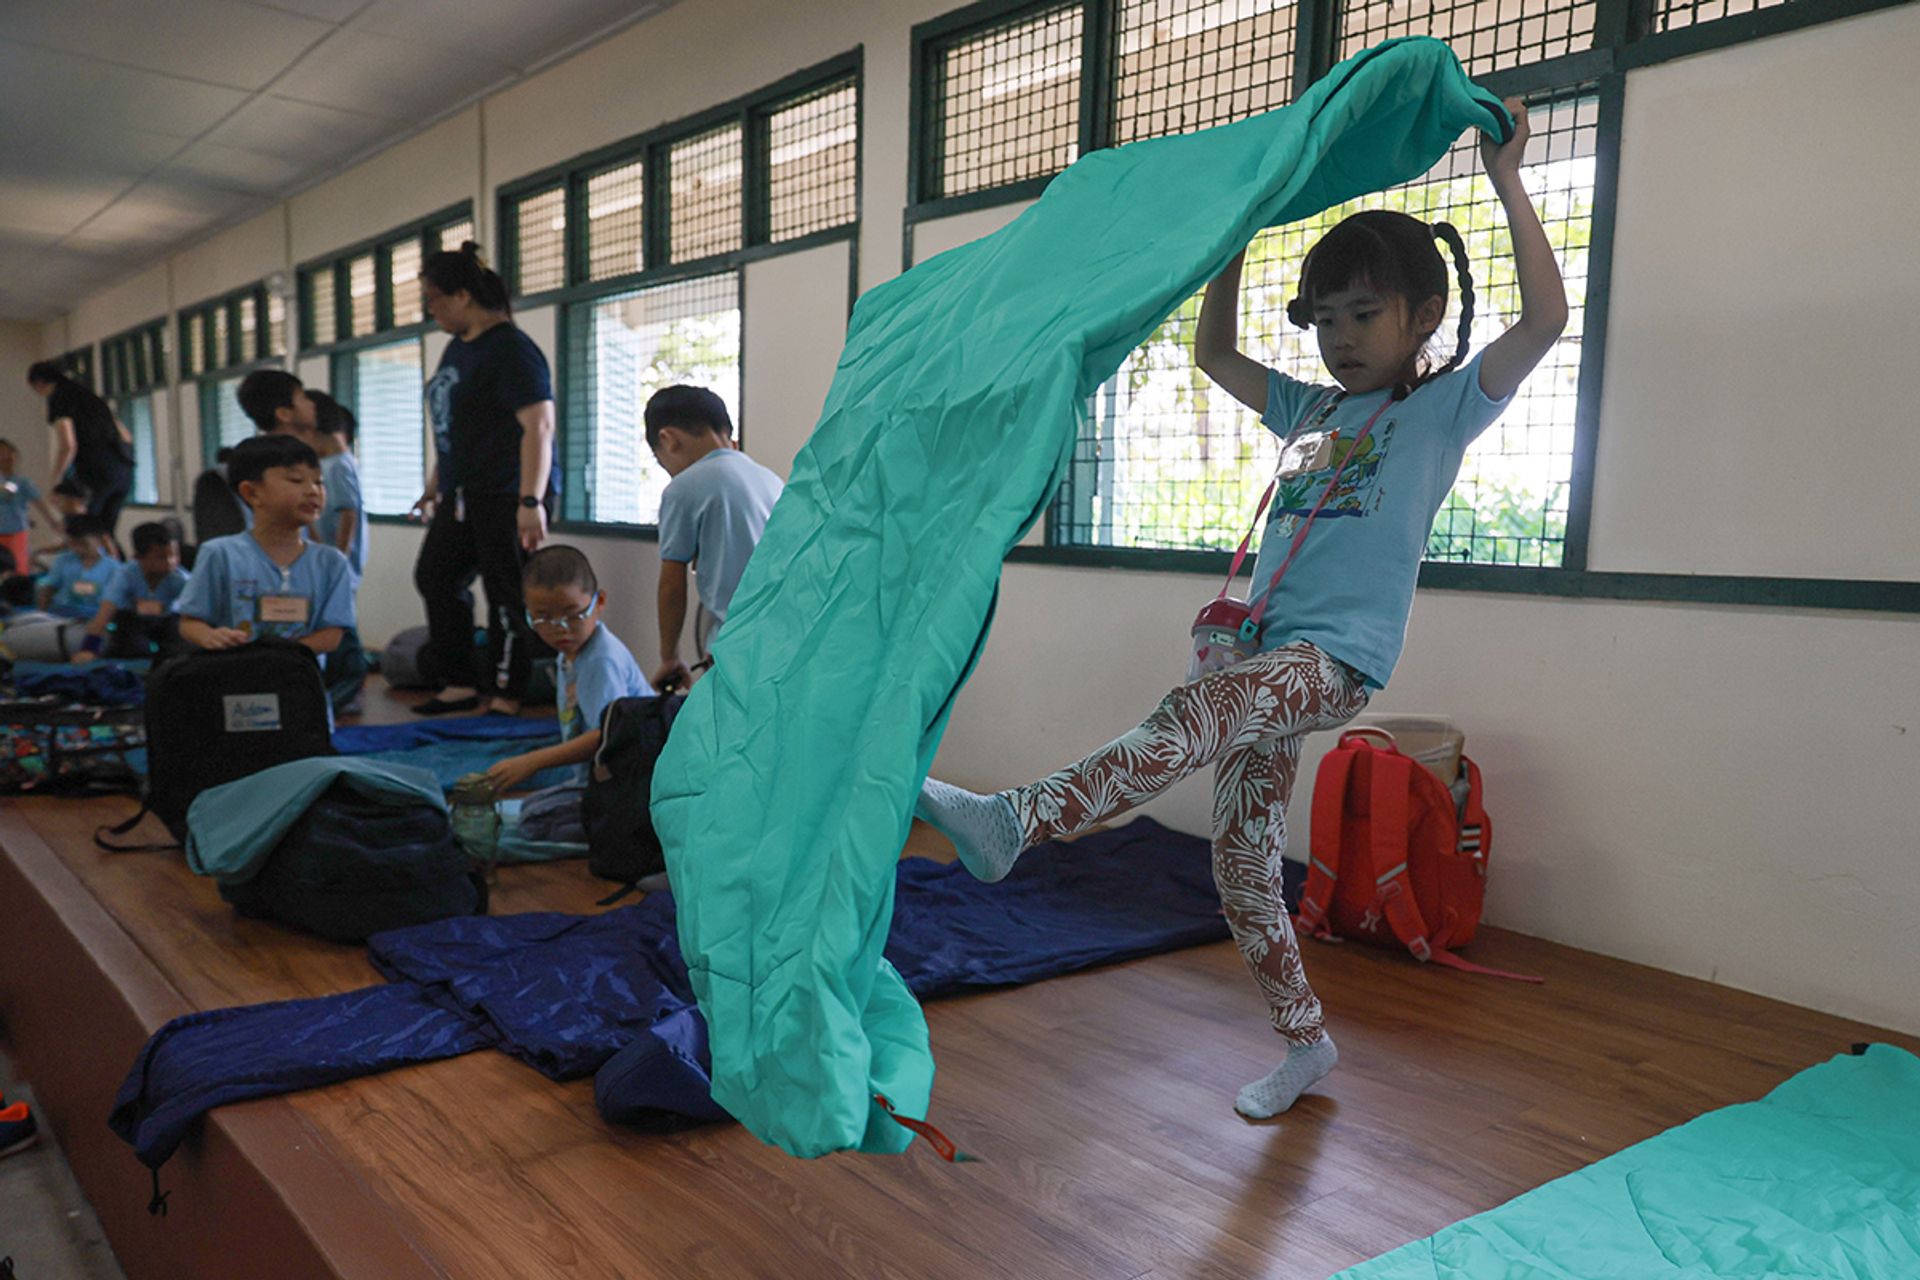 Huang Xinyi prepares her sleeping bag. As the lodge has no air-conditioning, the children sleep under ceiling fans, which are supplemented with additional fans and mosquito coils brought by the pre-school.